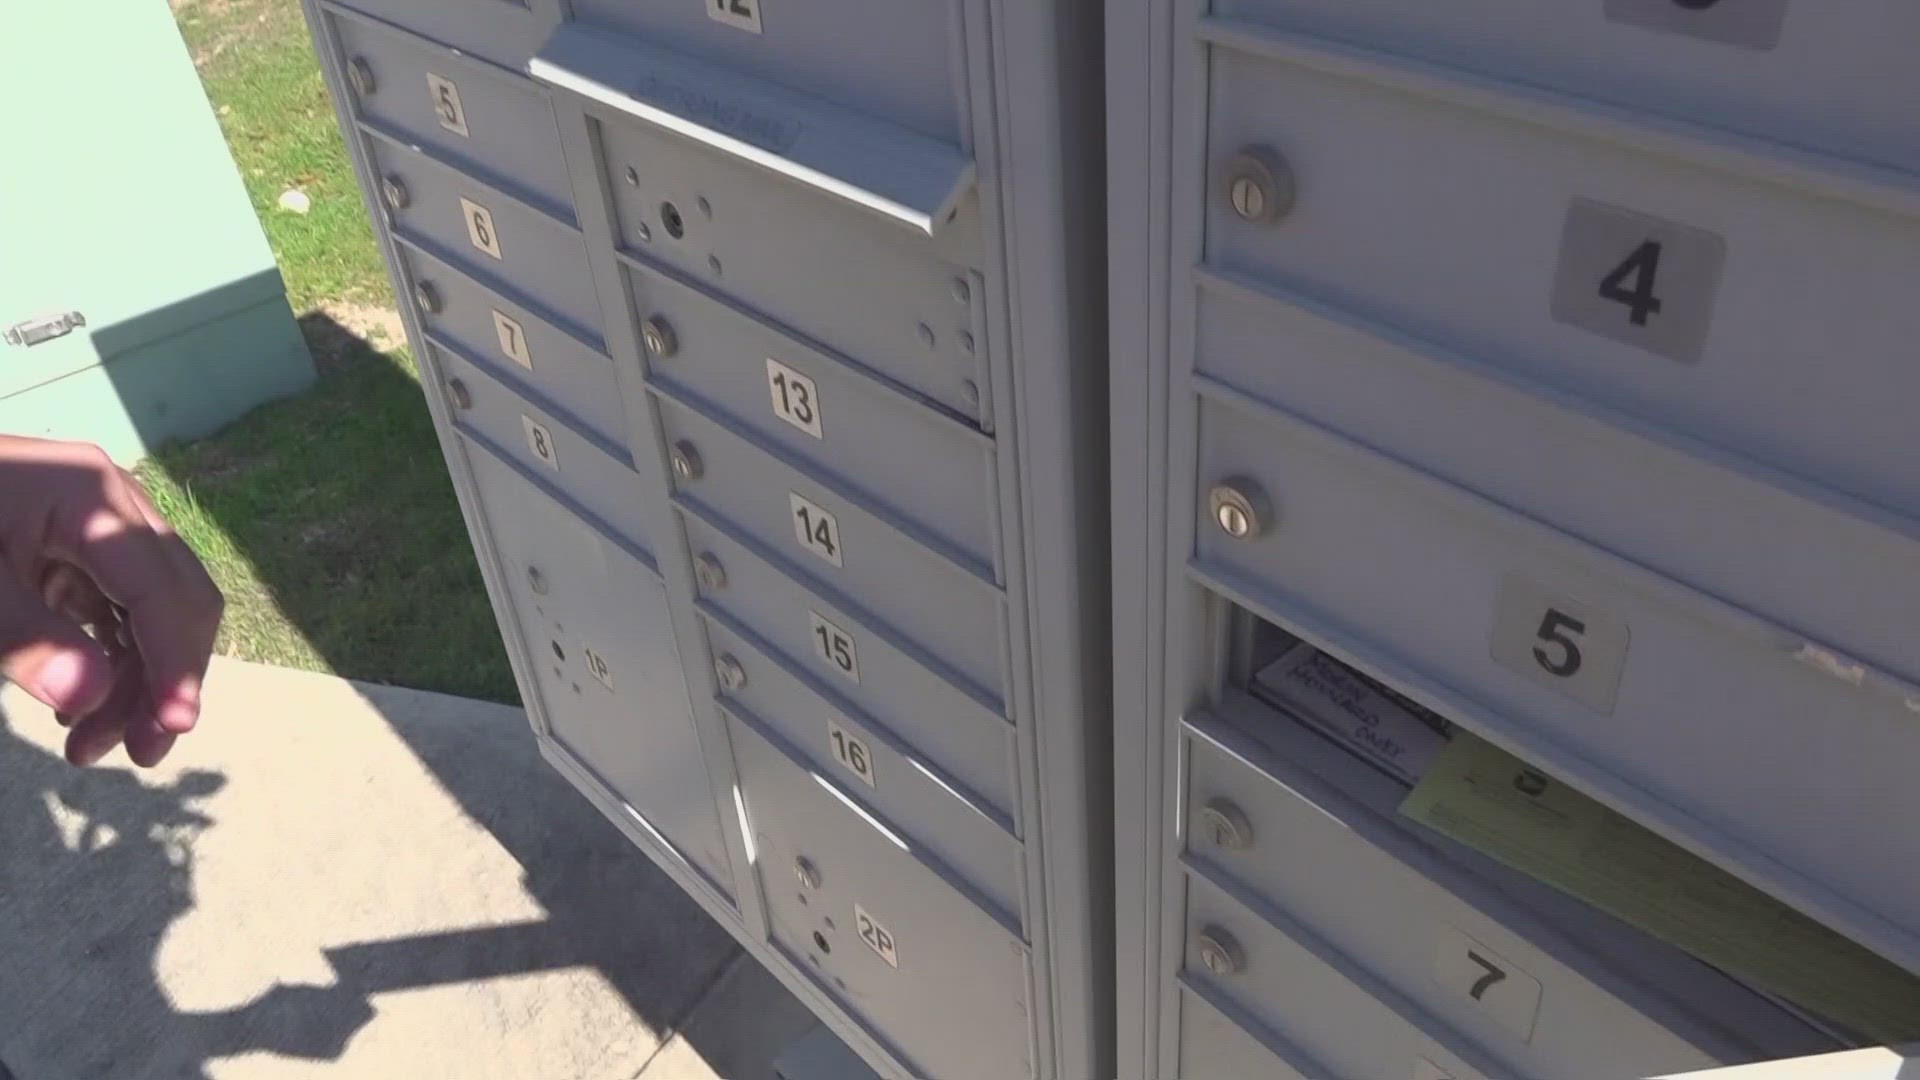 One resident says he hasn't gotten any mail from USPS in over a week.